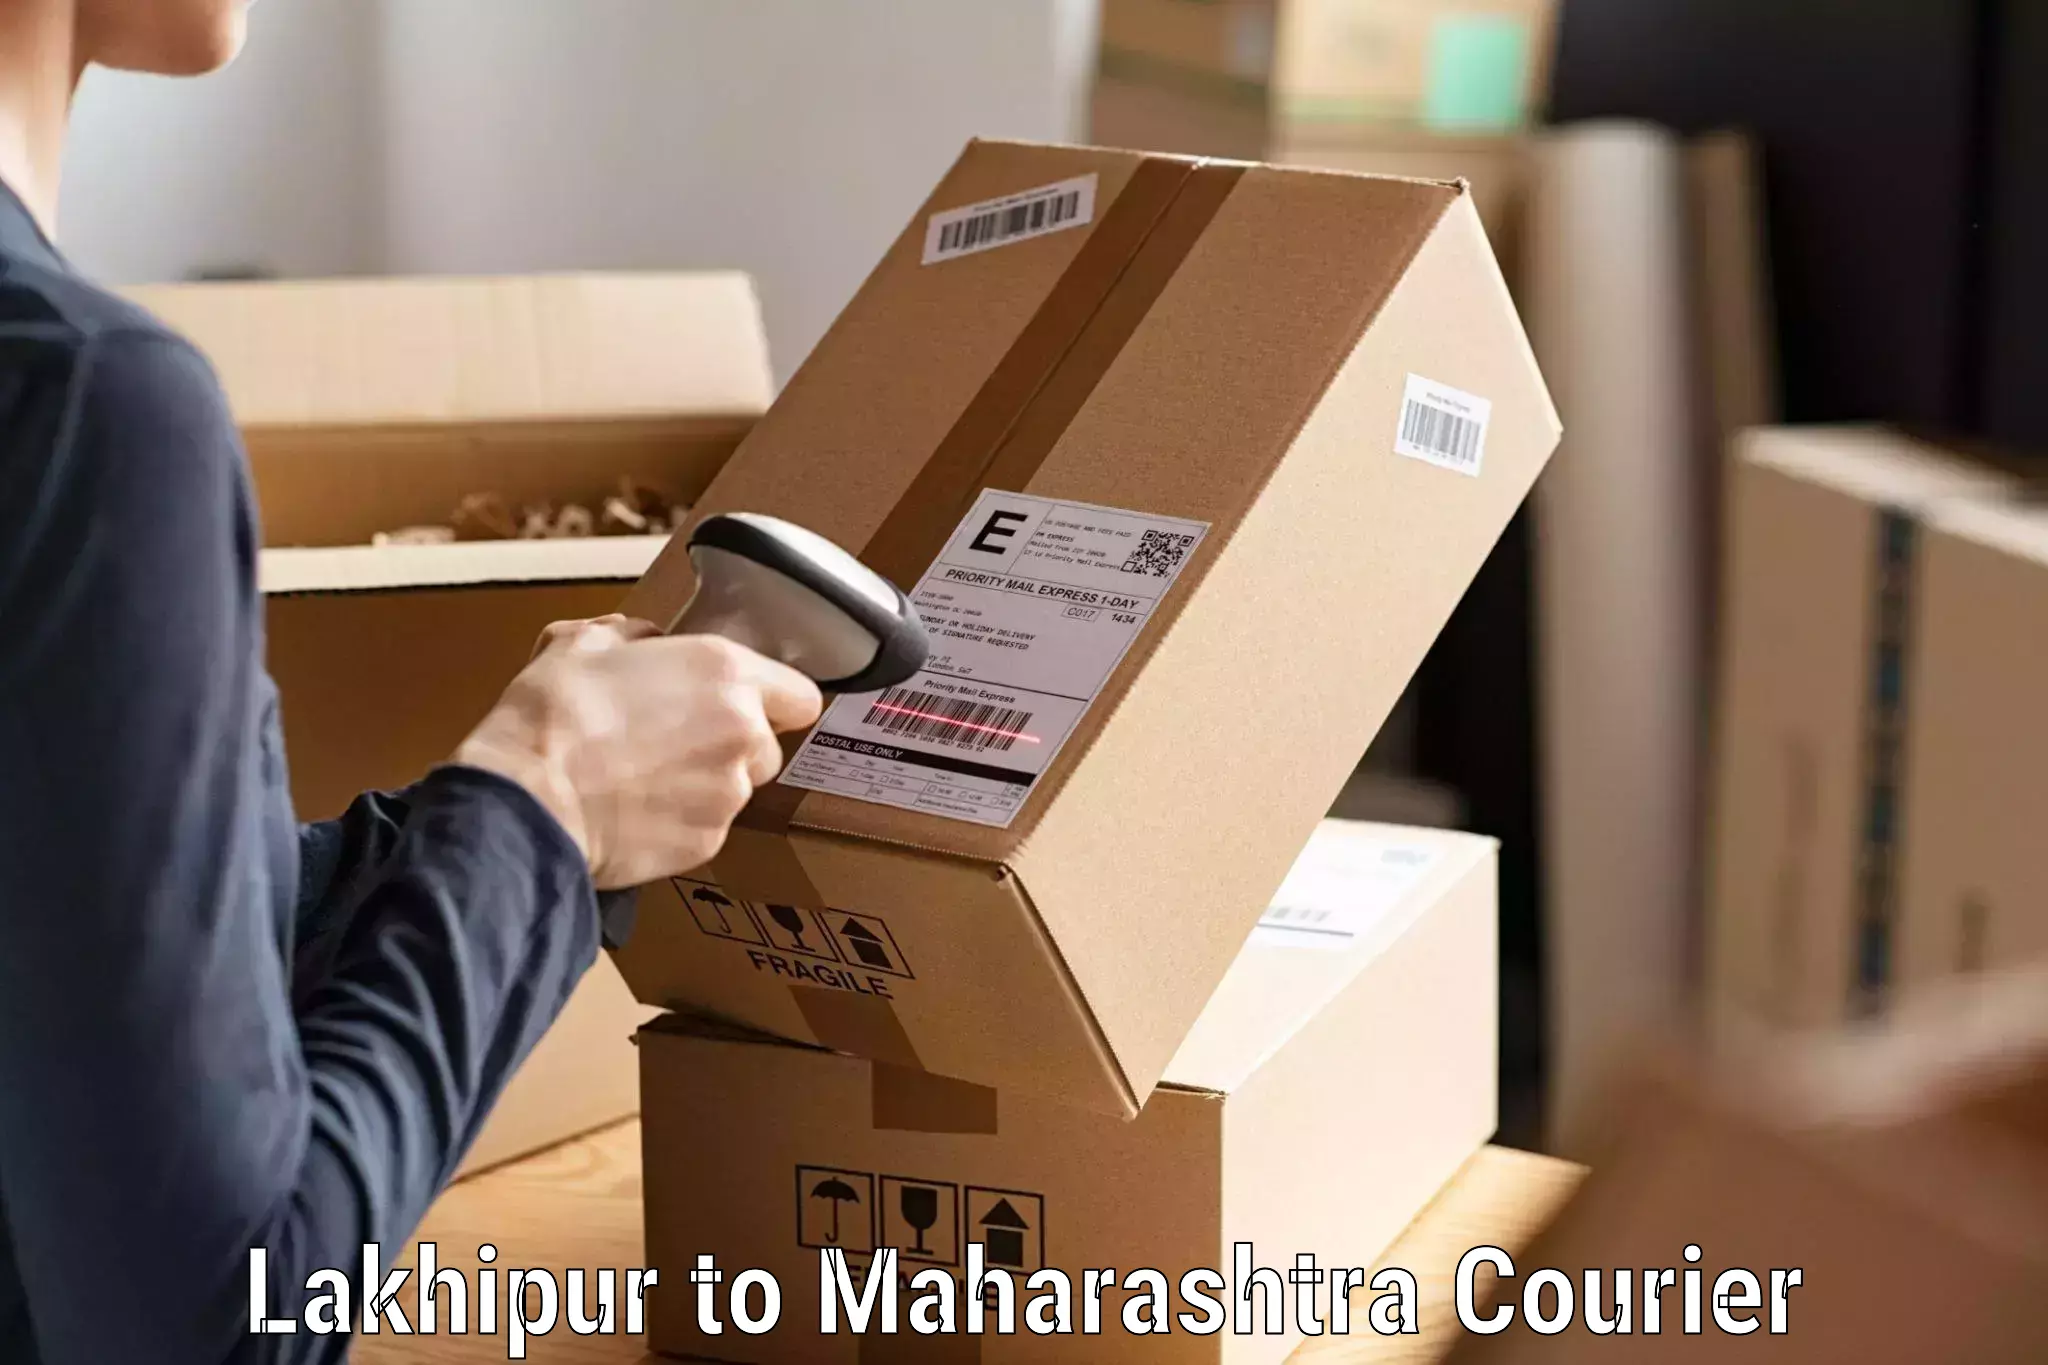 Reliable courier service Lakhipur to Maharashtra